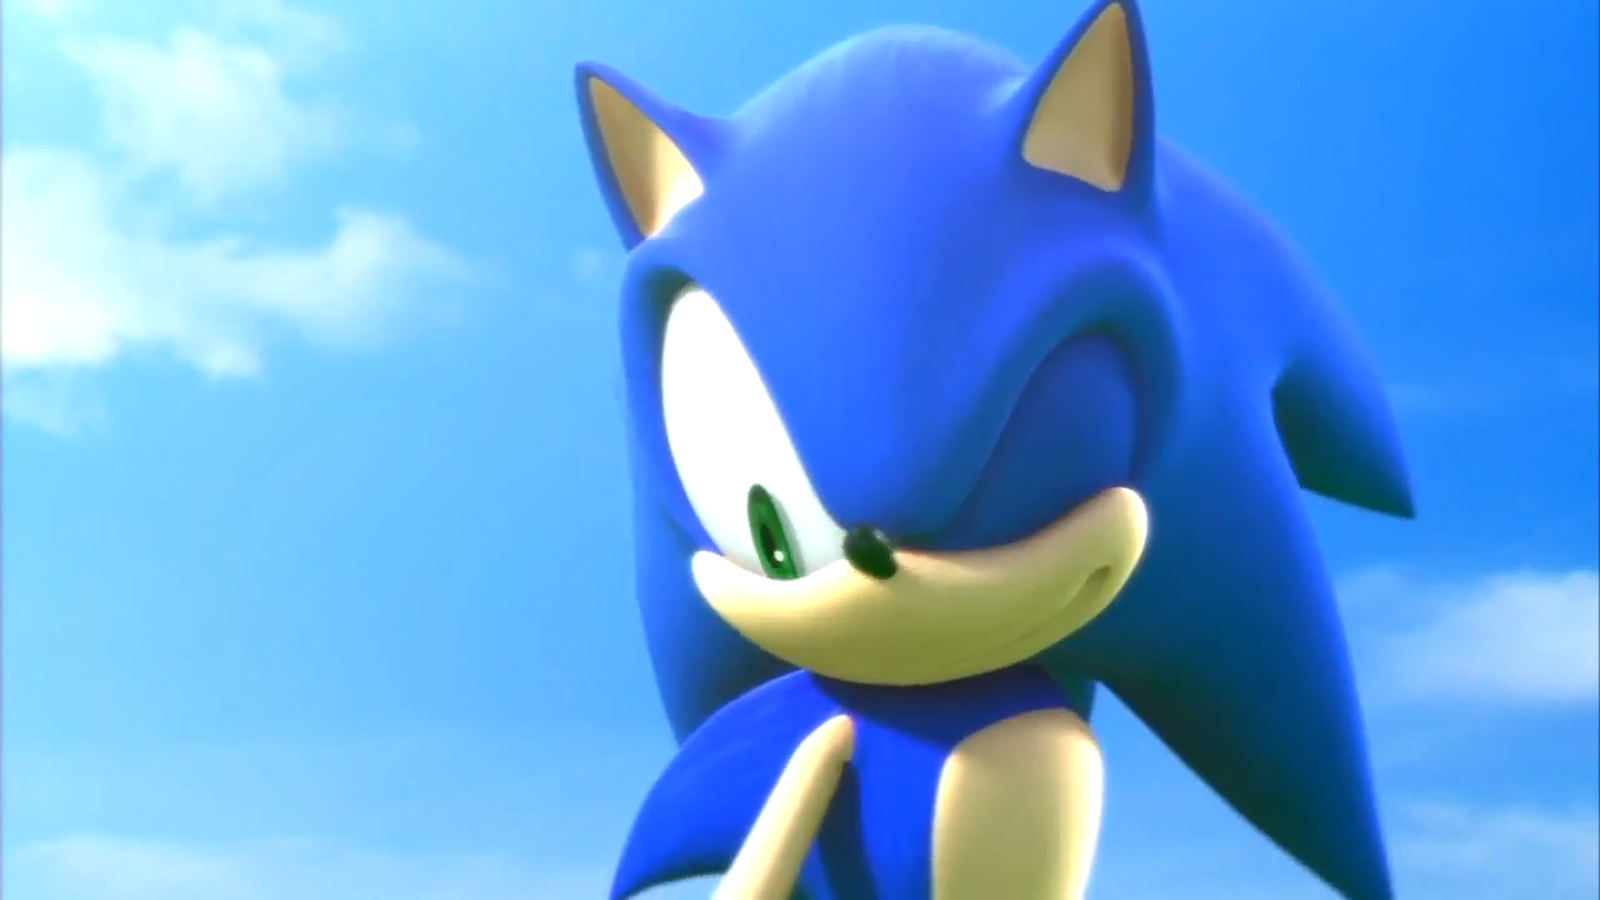 Video Game Sonic the Hedgehog (2006) HD Wallpaper by